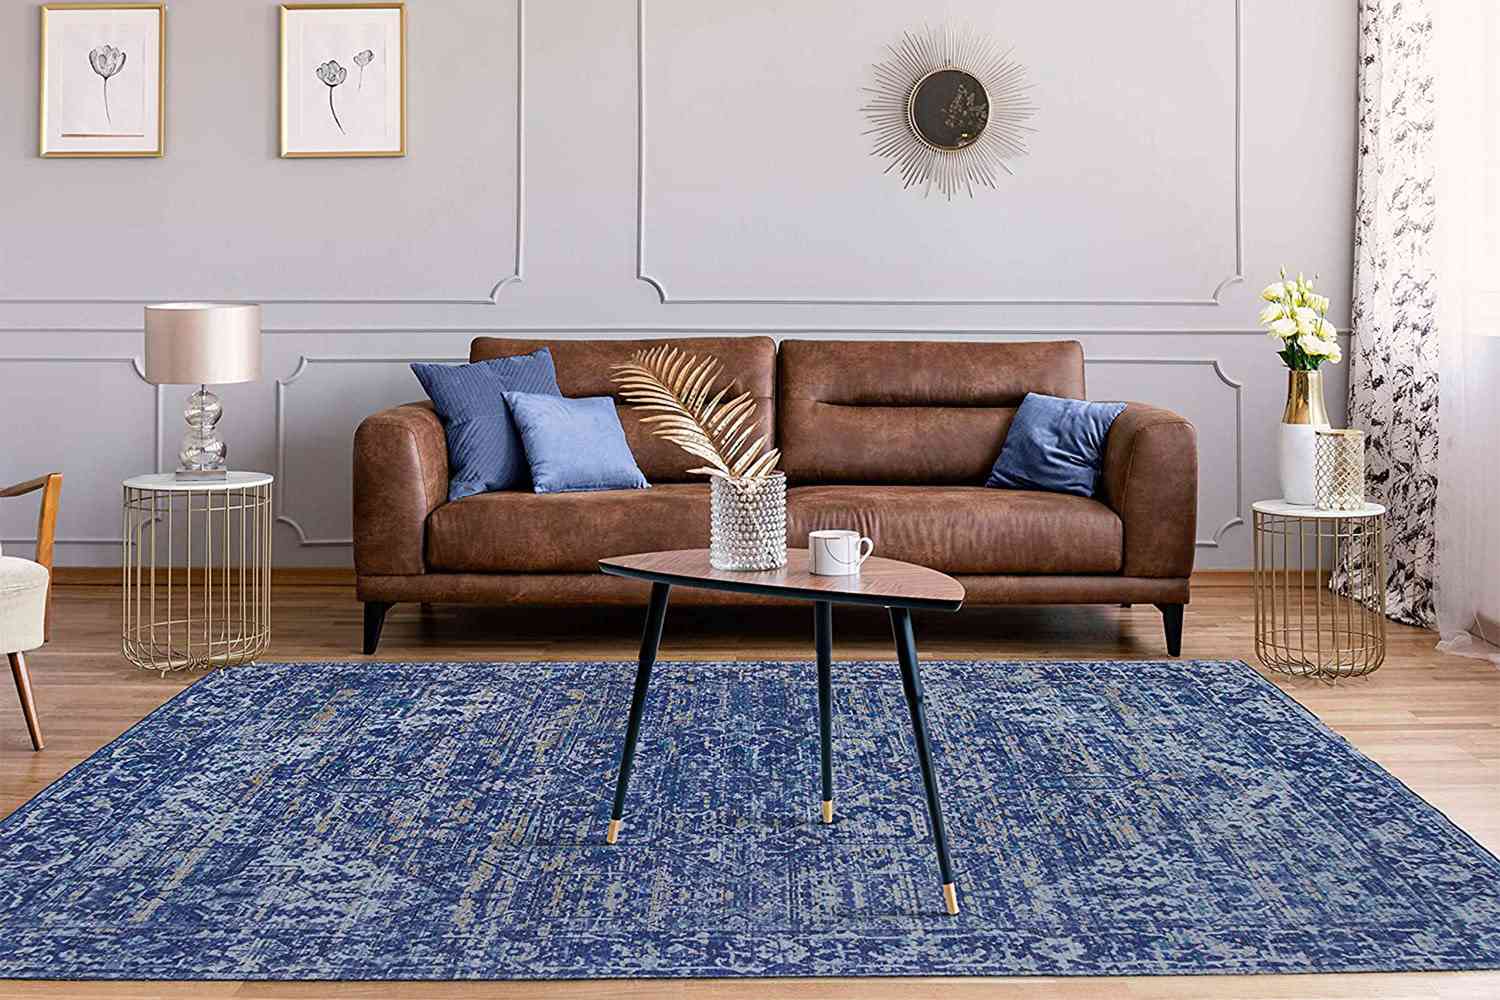 Best Washable Rugs To In 2021, Which Rug Is Easy To Clean